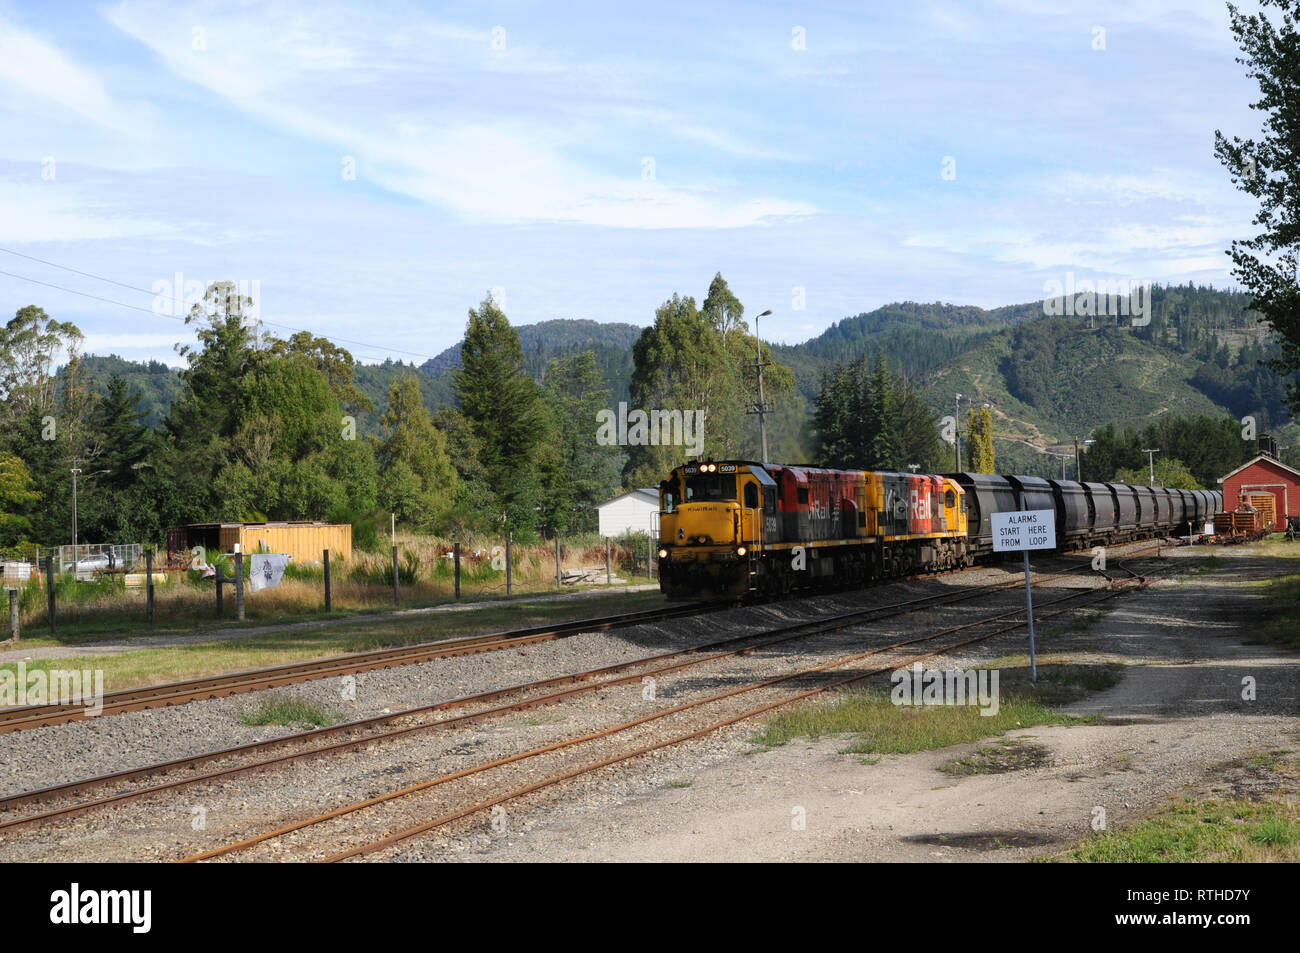 Kiwi Rail locomotive at Reefton on New Zealands South Island. The locomotives on this line are used to haul coal. Stock Photo